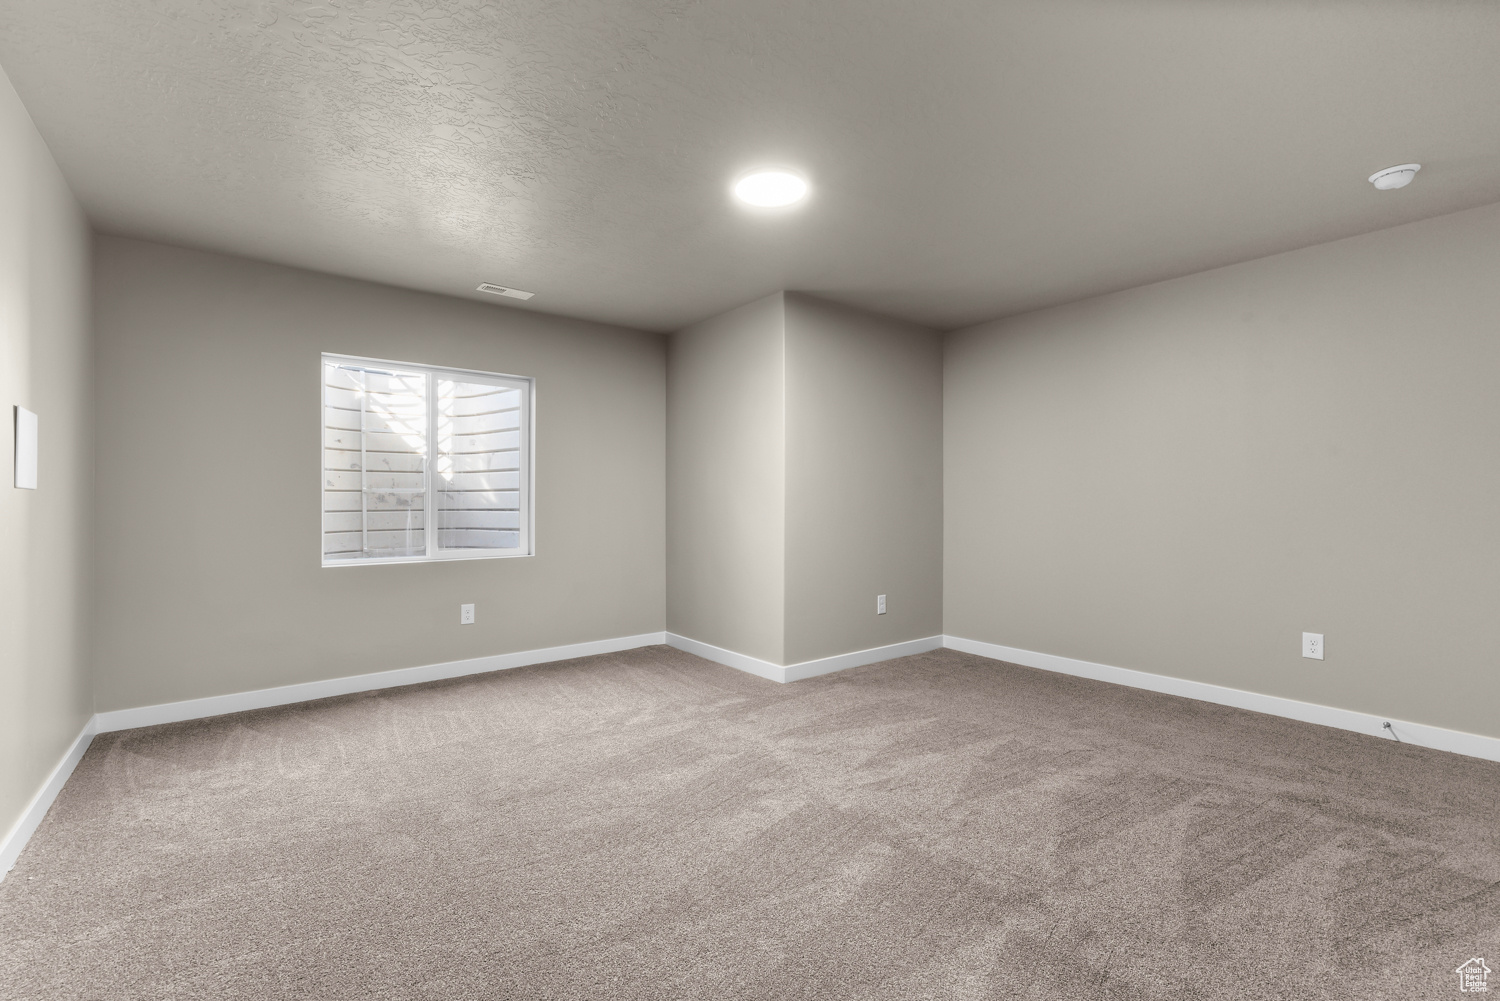 Spare room featuring carpet and a textured ceiling